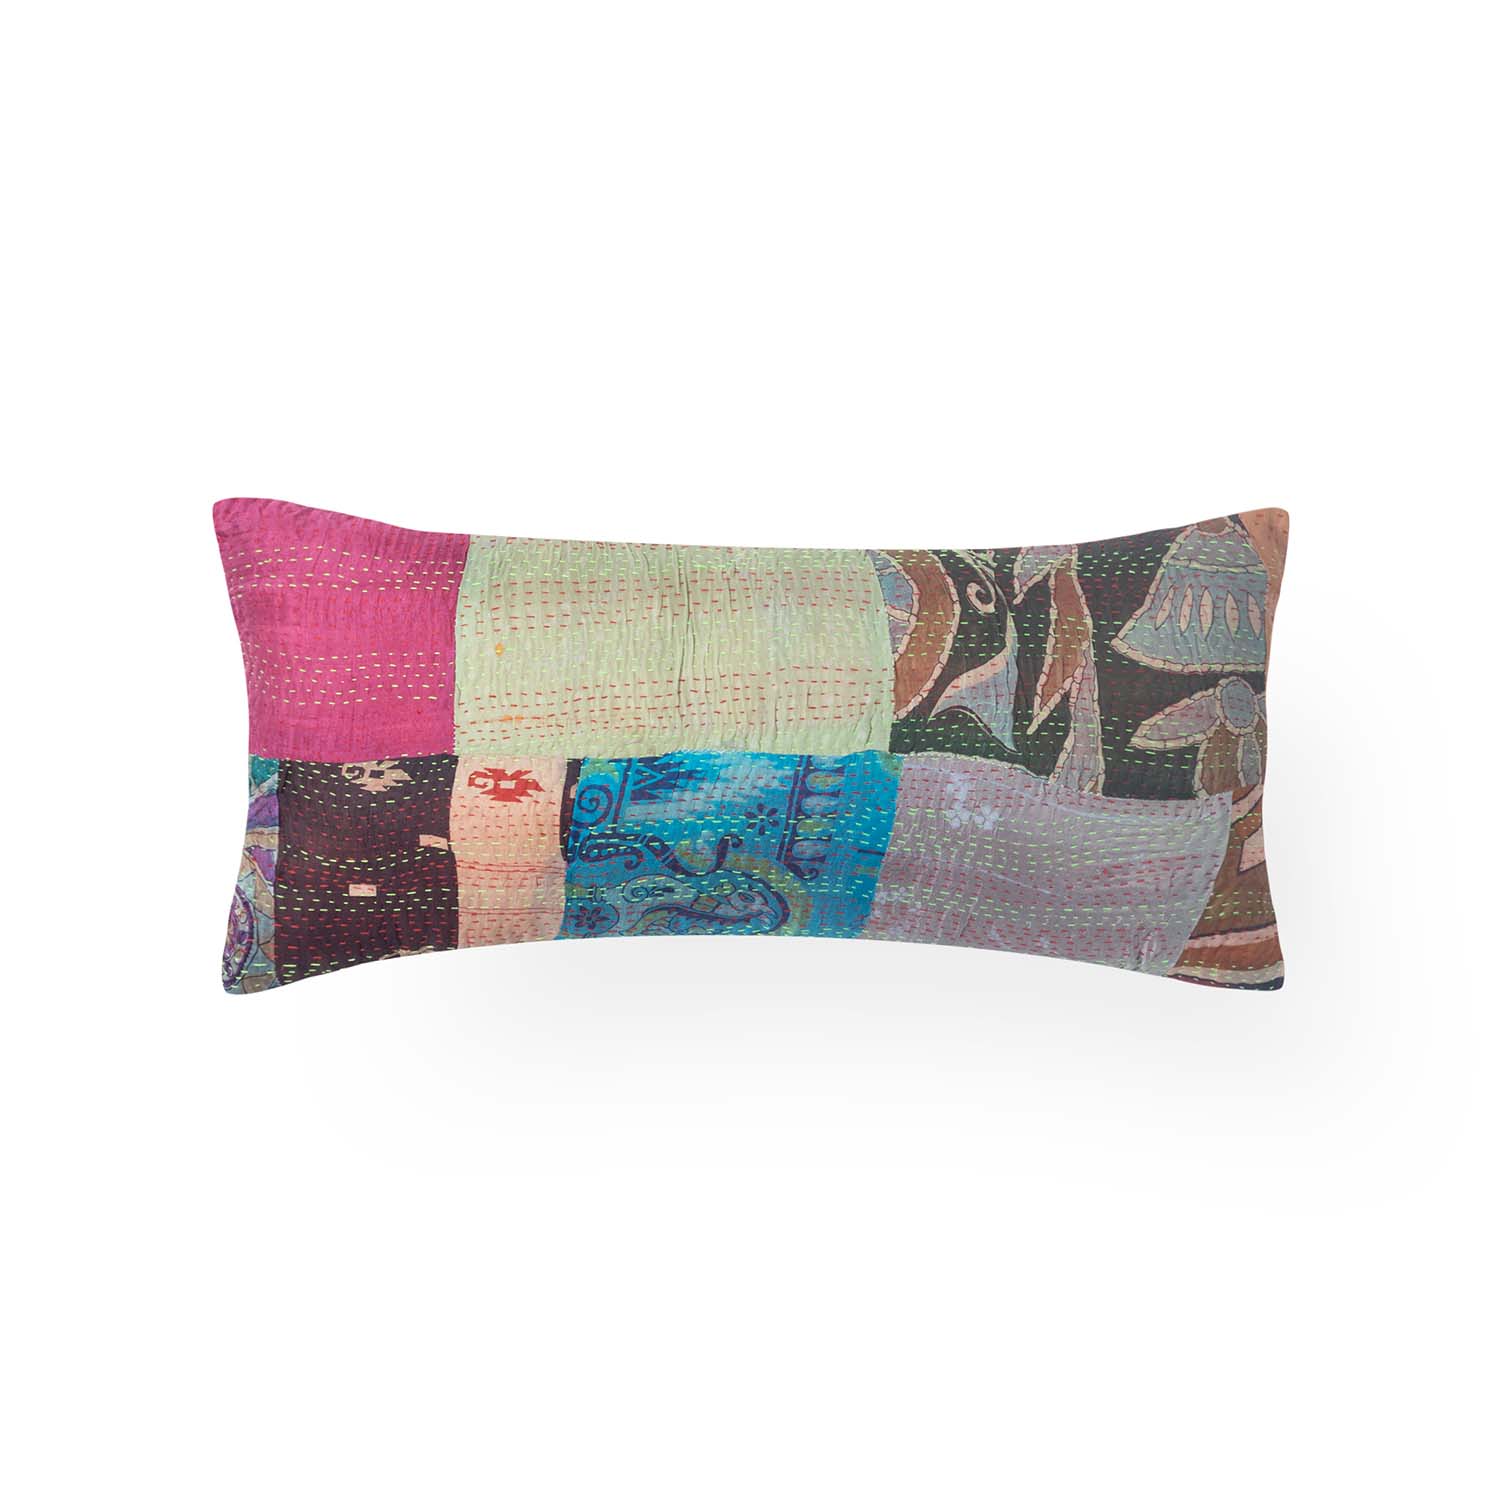 PatchWork Kantha Cushion Cover - 11X22